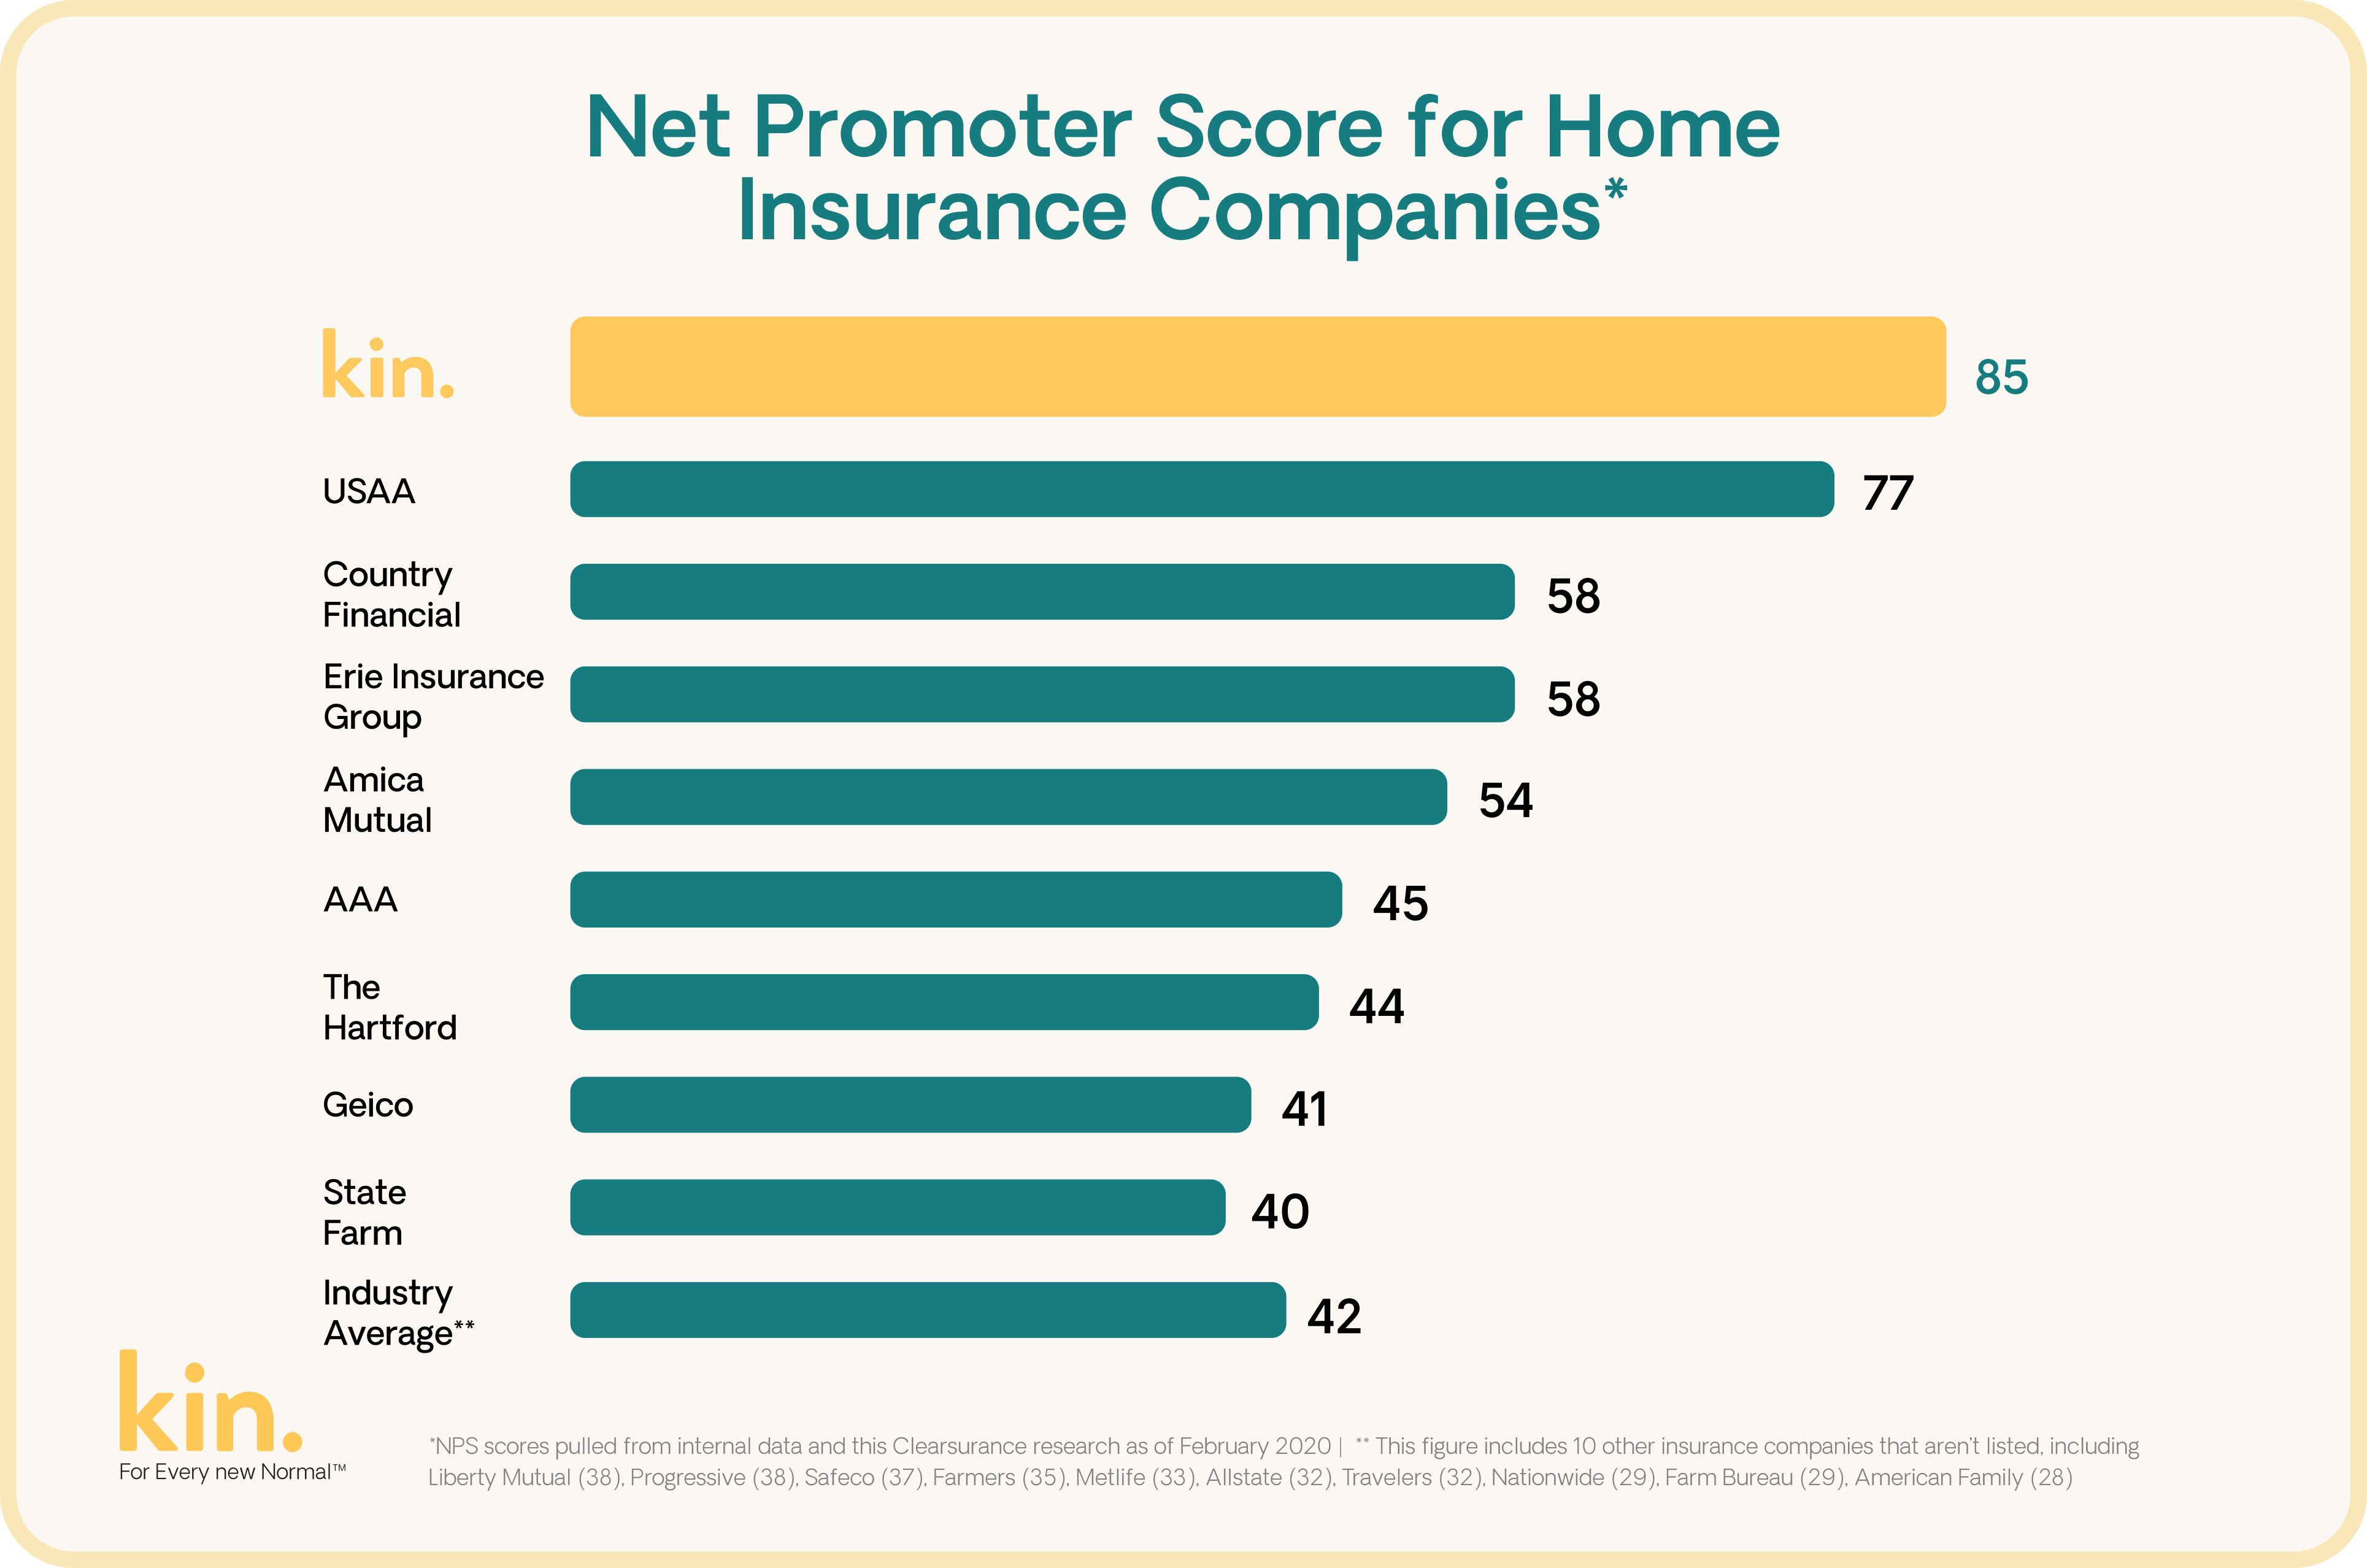 Chart listing Net Promoter Scores for home insurance companies, including the industry’s average score of 42. The Net Promoter Scores are: Kin, 85; USAA, 77; Country Financial, 58; Erie Insurance Group, 58; Amica, 54; AAA, 45; The Hartford, 44; GEICO, 41; State Farm, 40.